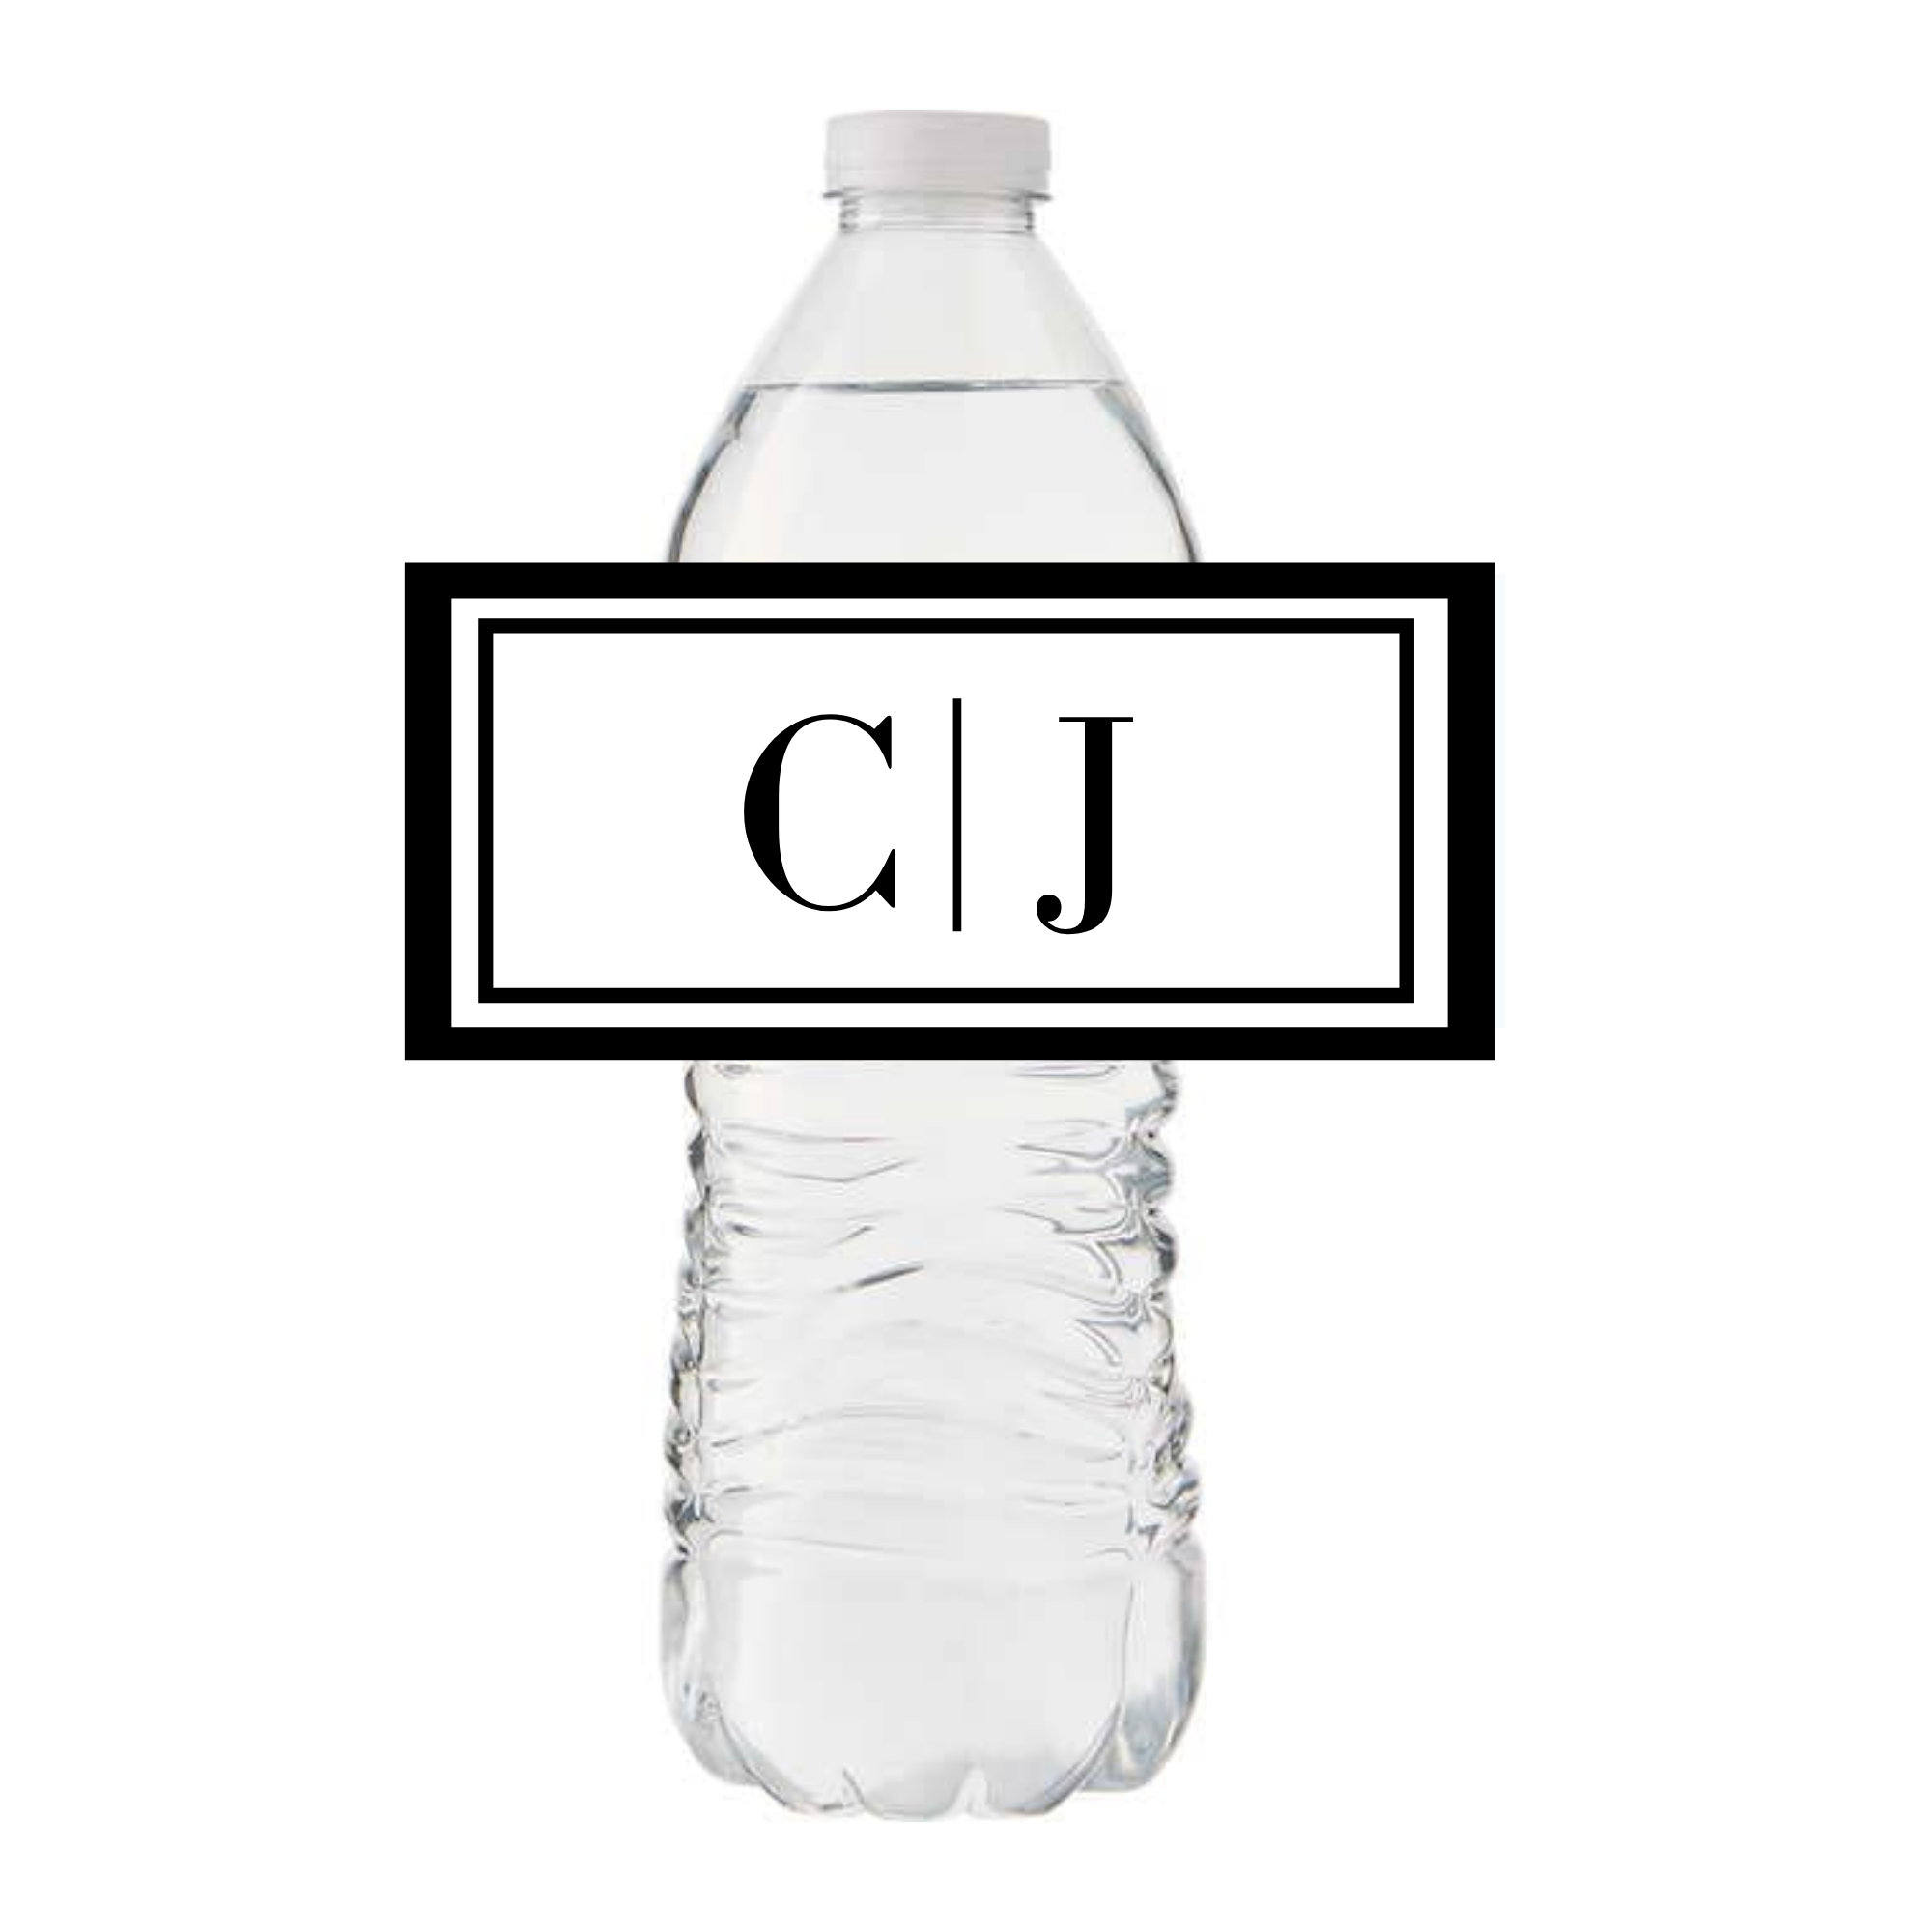 Personalized Modern Black & White Square Water Resistant Name Labels -  Current Labels